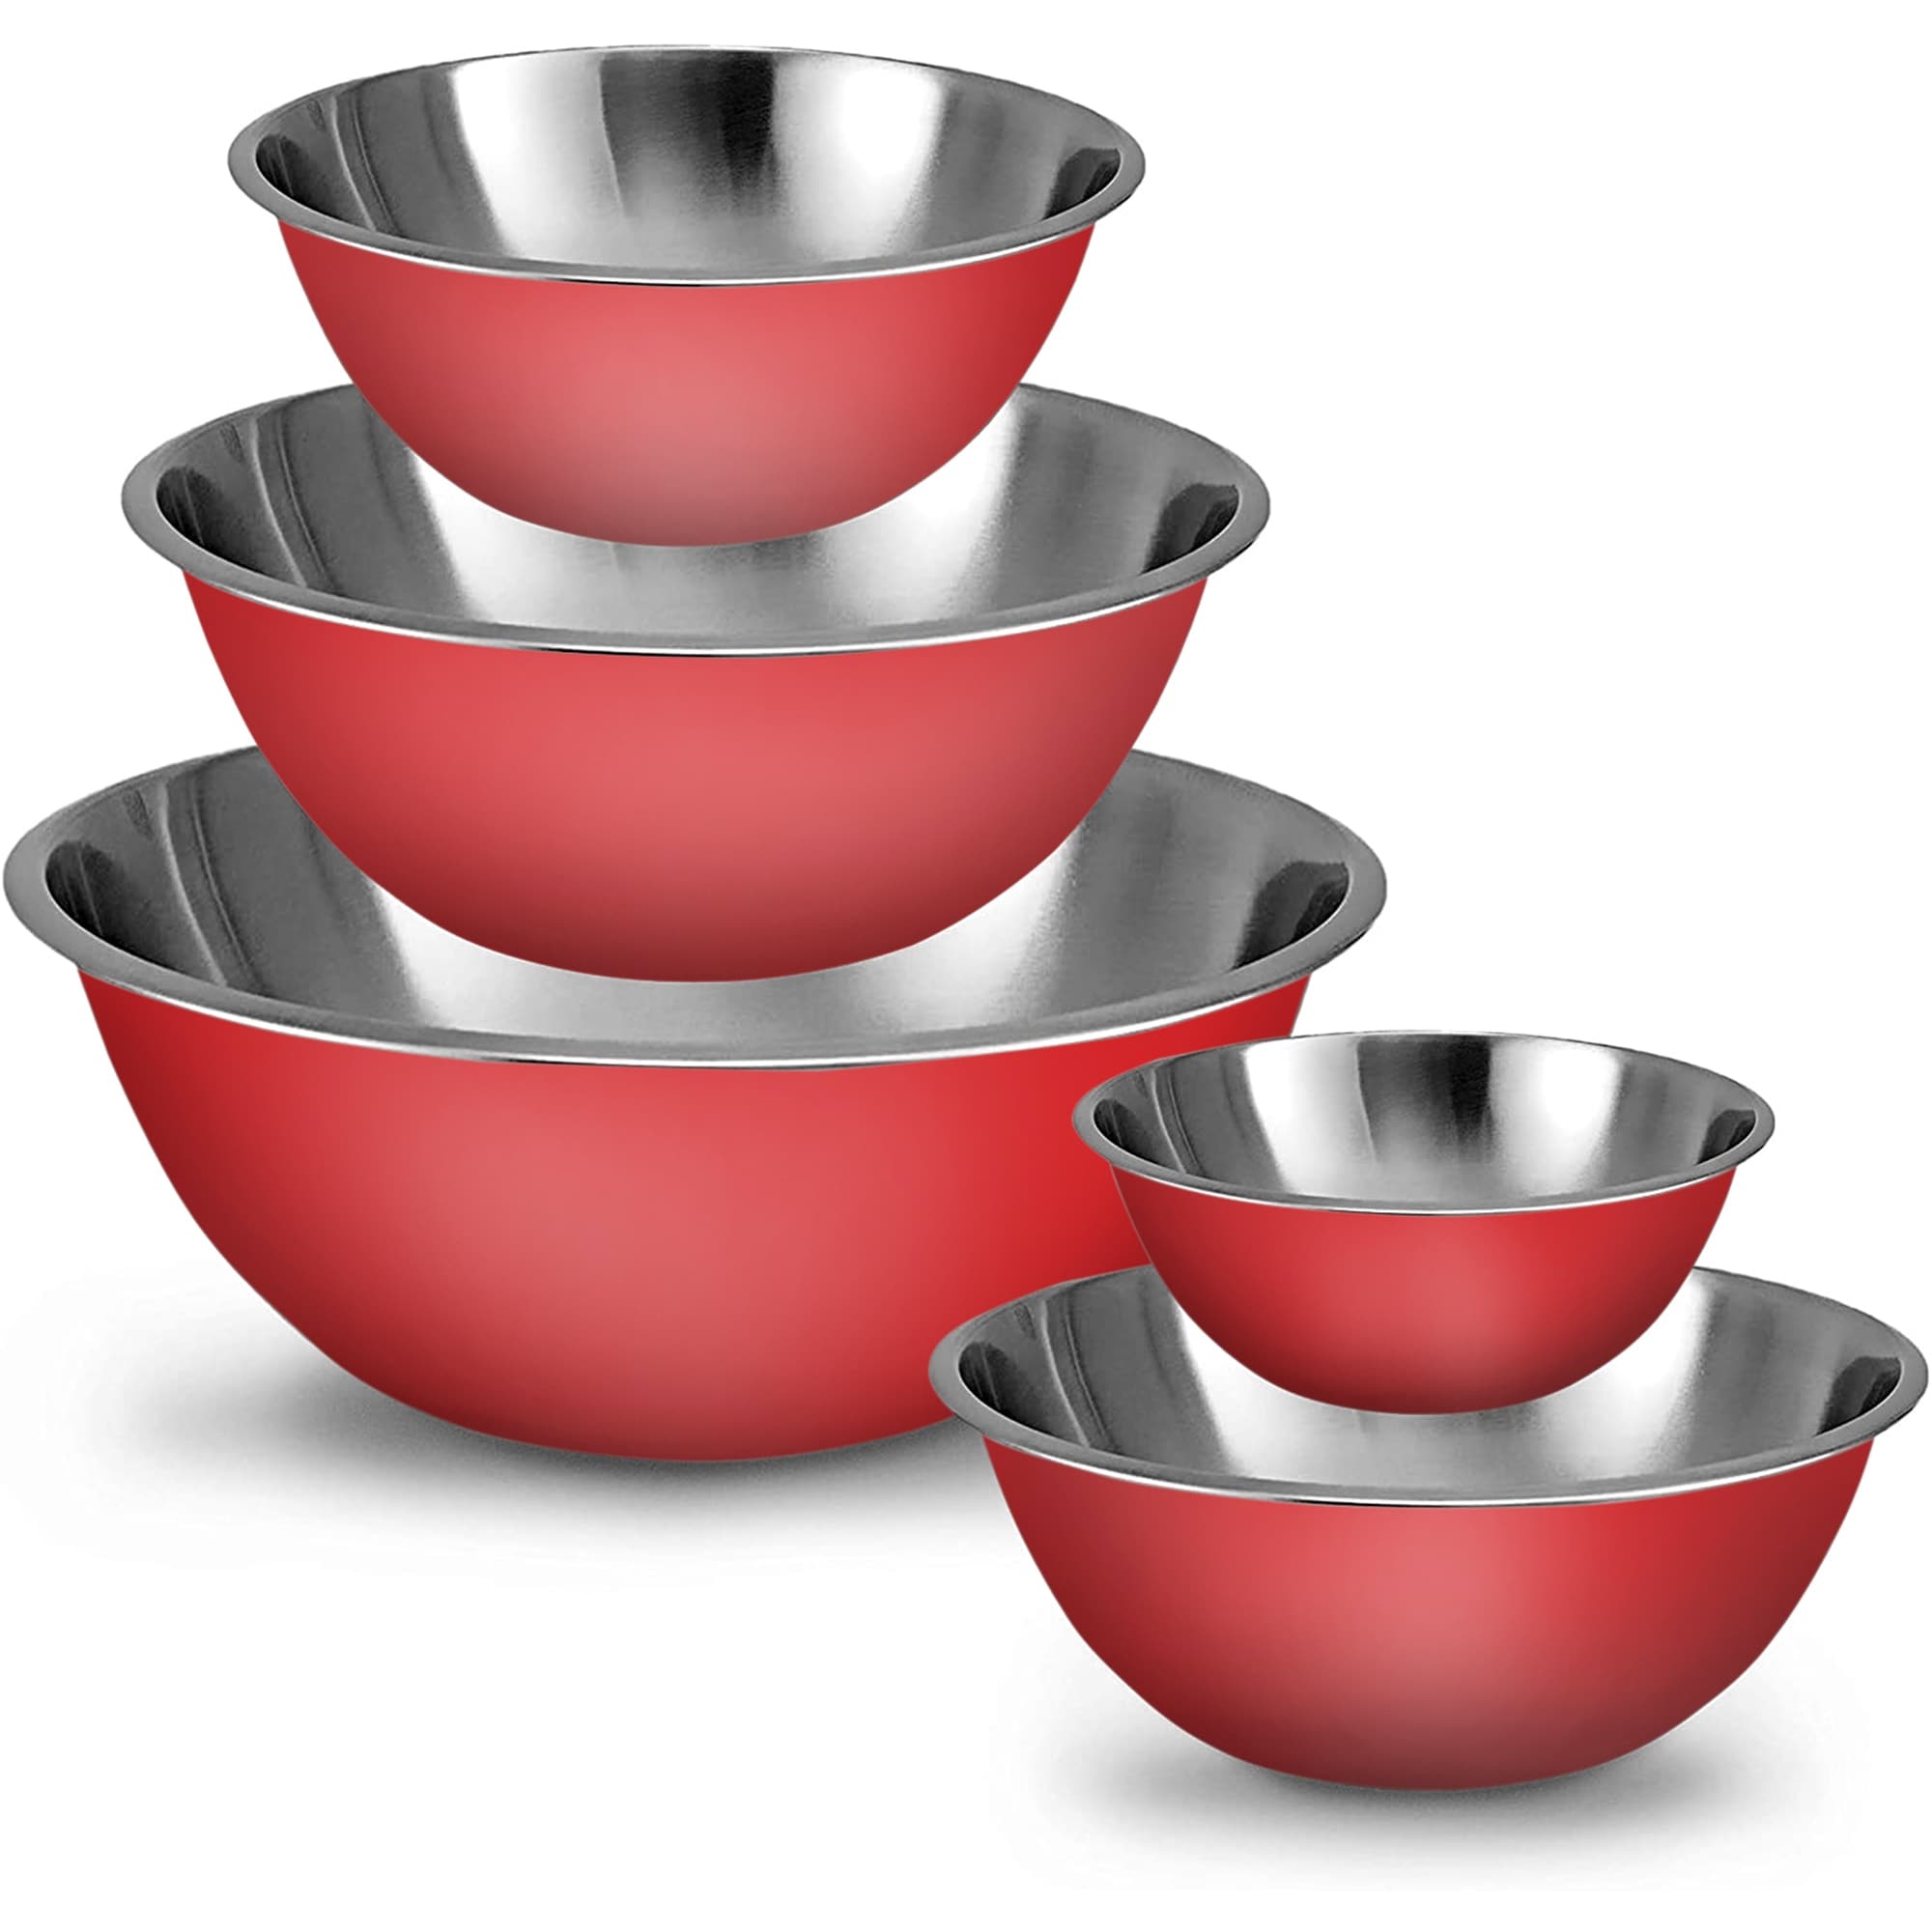 https://ak1.ostkcdn.com/images/products/is/images/direct/b9b2398f48e3cd0e8e2a154ce95431c4e49d166a/Heavy-Duty-Meal-Prep-Stainless-Steel-Mixing-Bowls-Set---Red.jpg